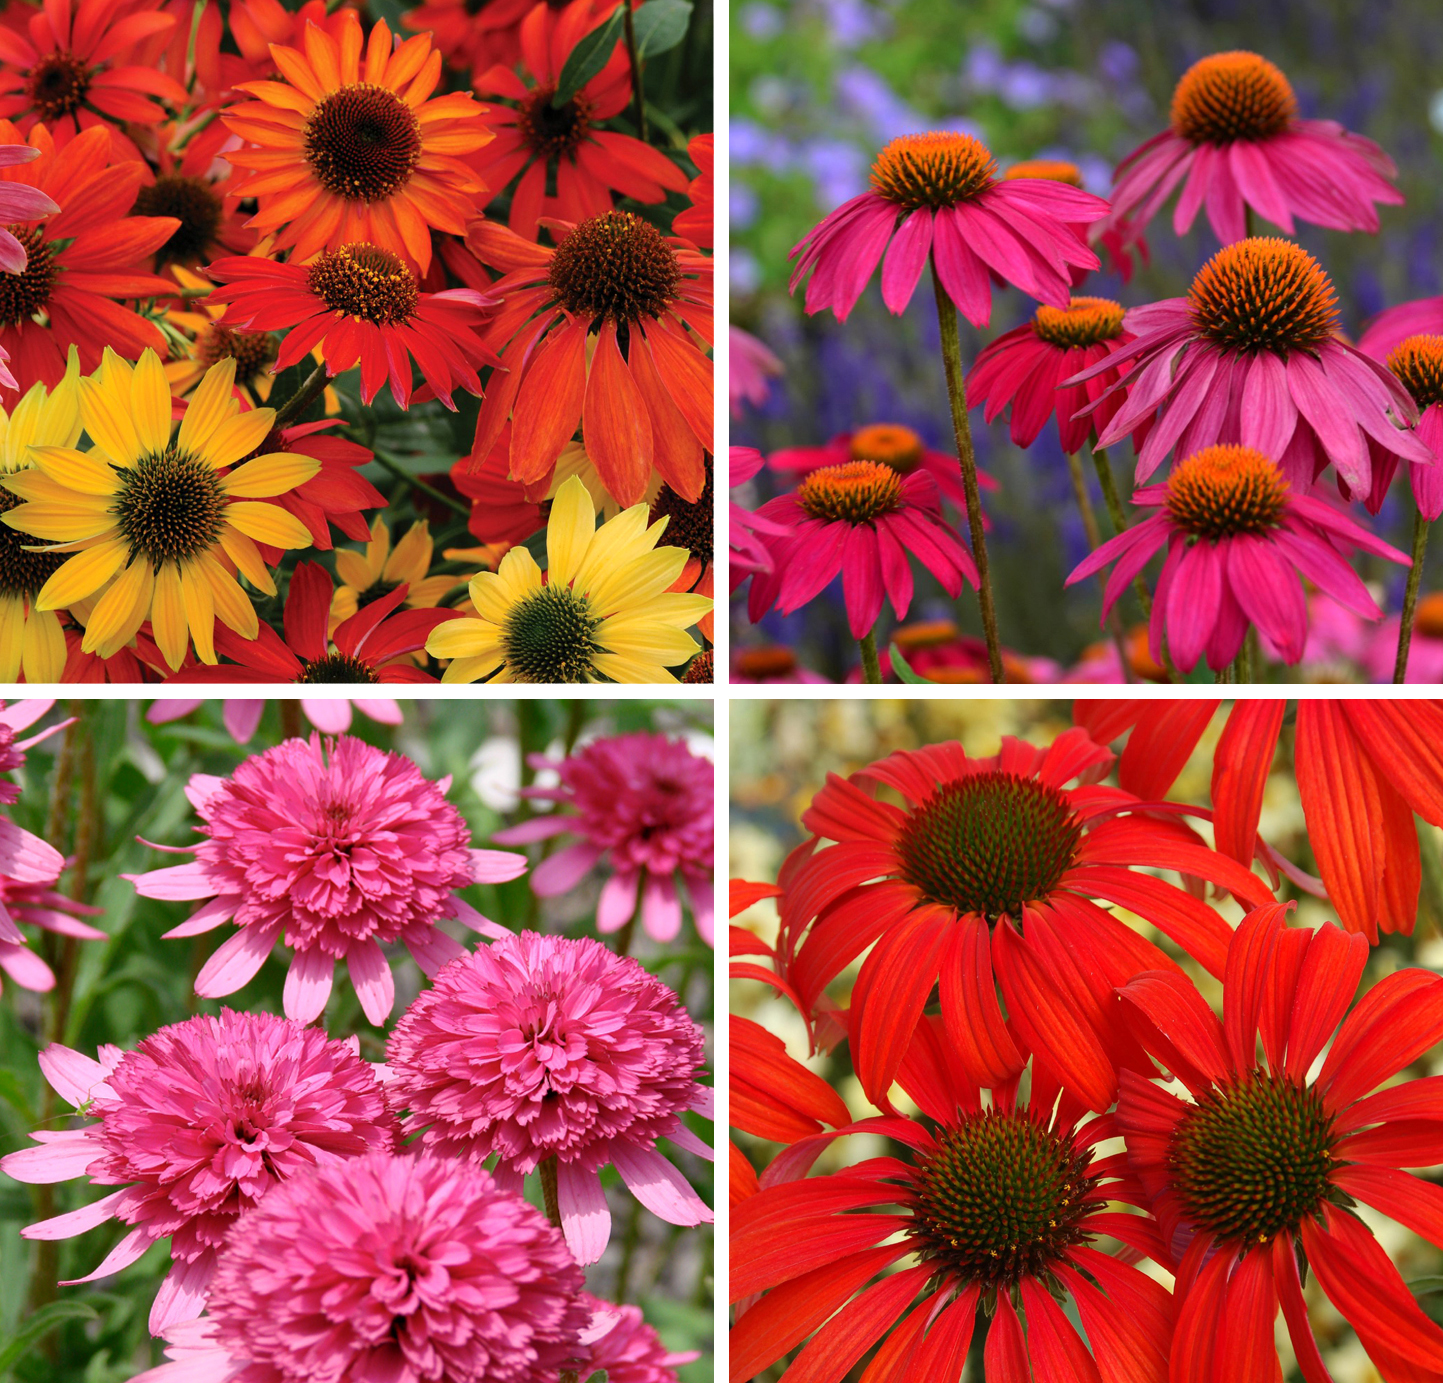 New, Colorful Coneflowers!